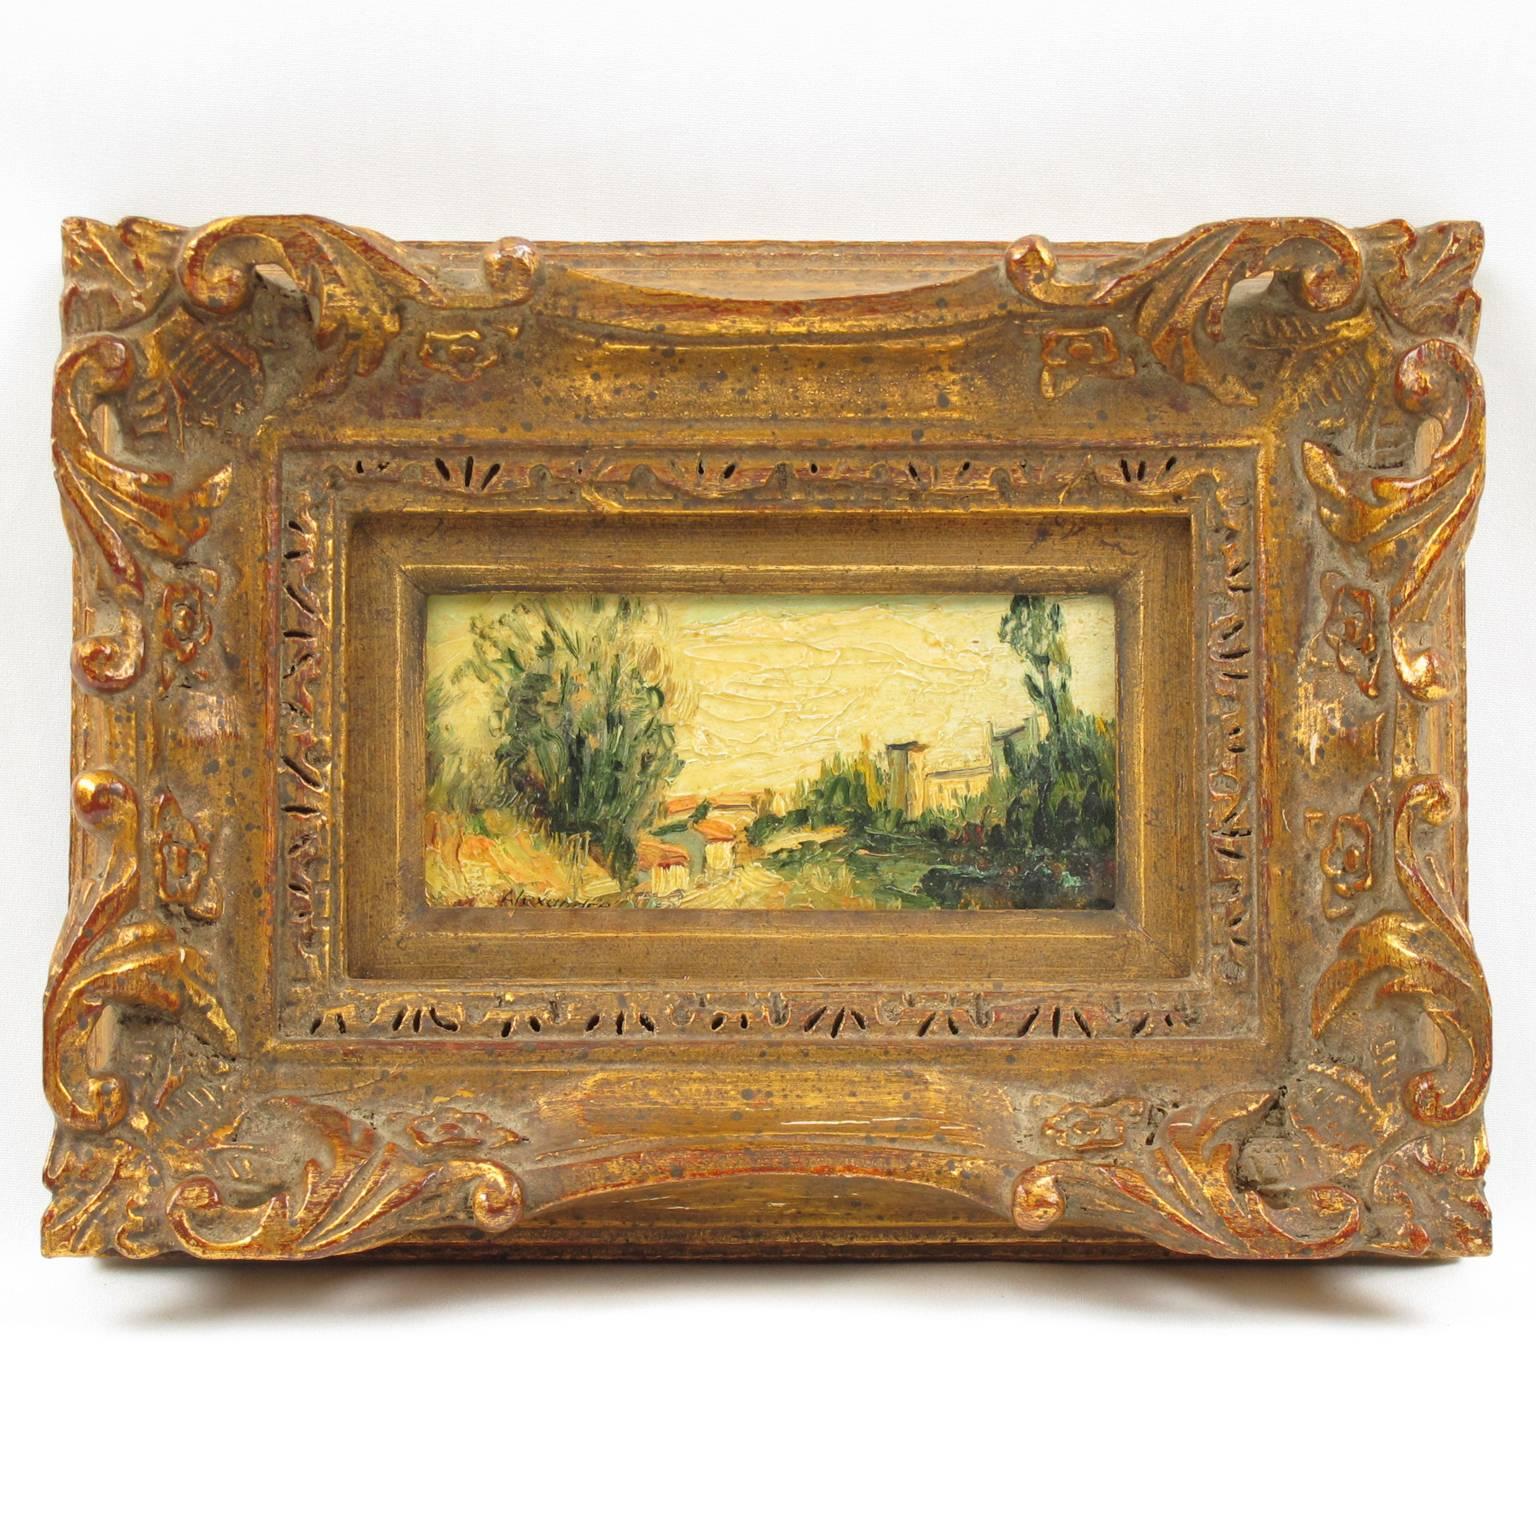 Lovely miniature painting mounted in a large detailed hand-carved gilt frame. Oil on wood panel depicting a Mediterranean landscape, probably in the south of France. Painting is signed lower left corner 'Alexandre'. Impressive large dimensional